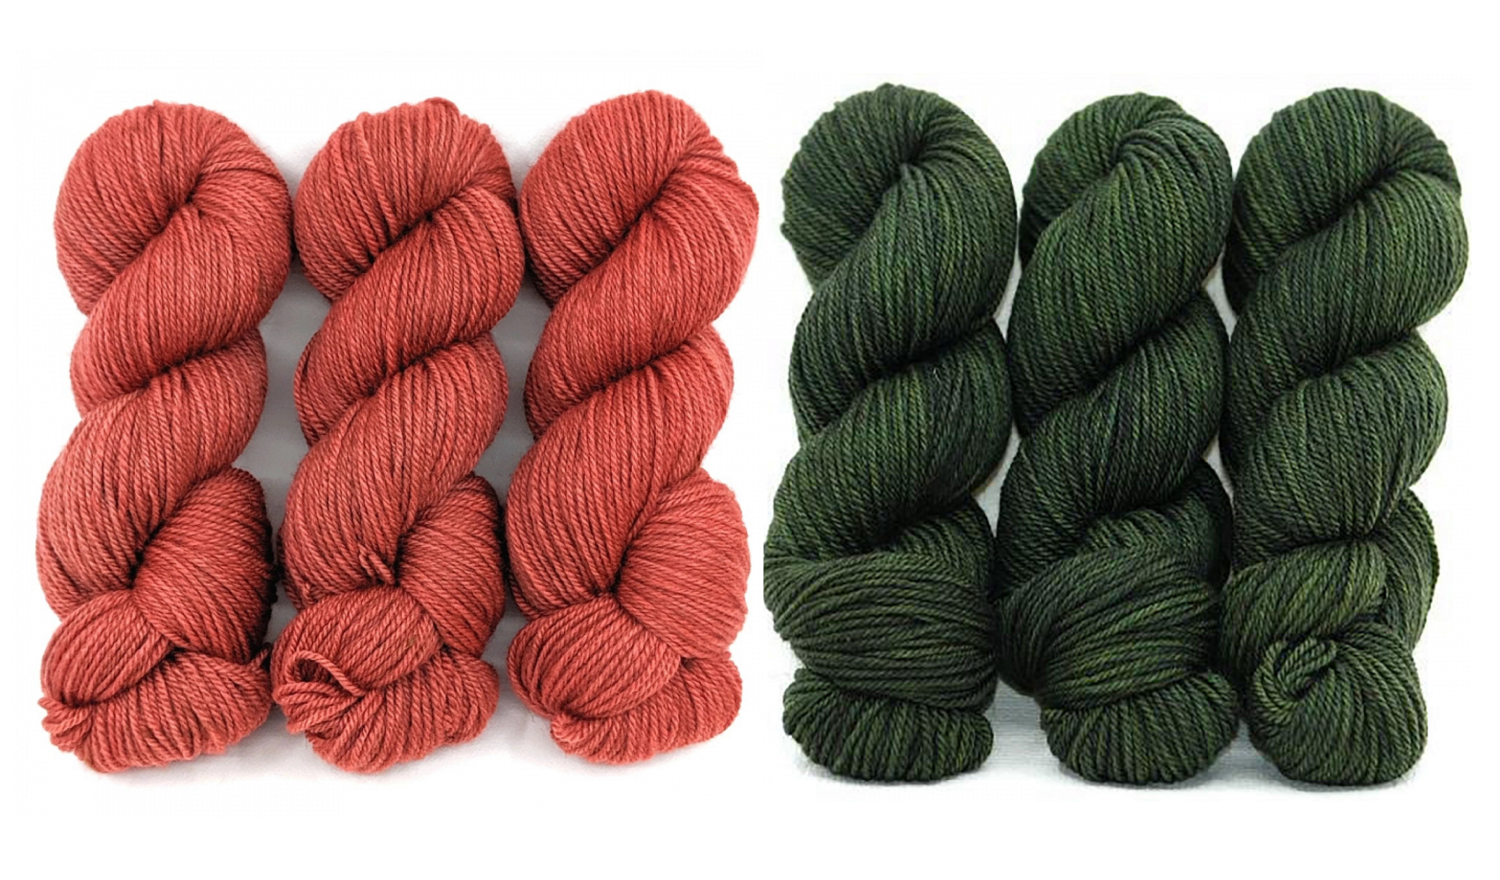 The Perfect Combo of Old World and New World Wools